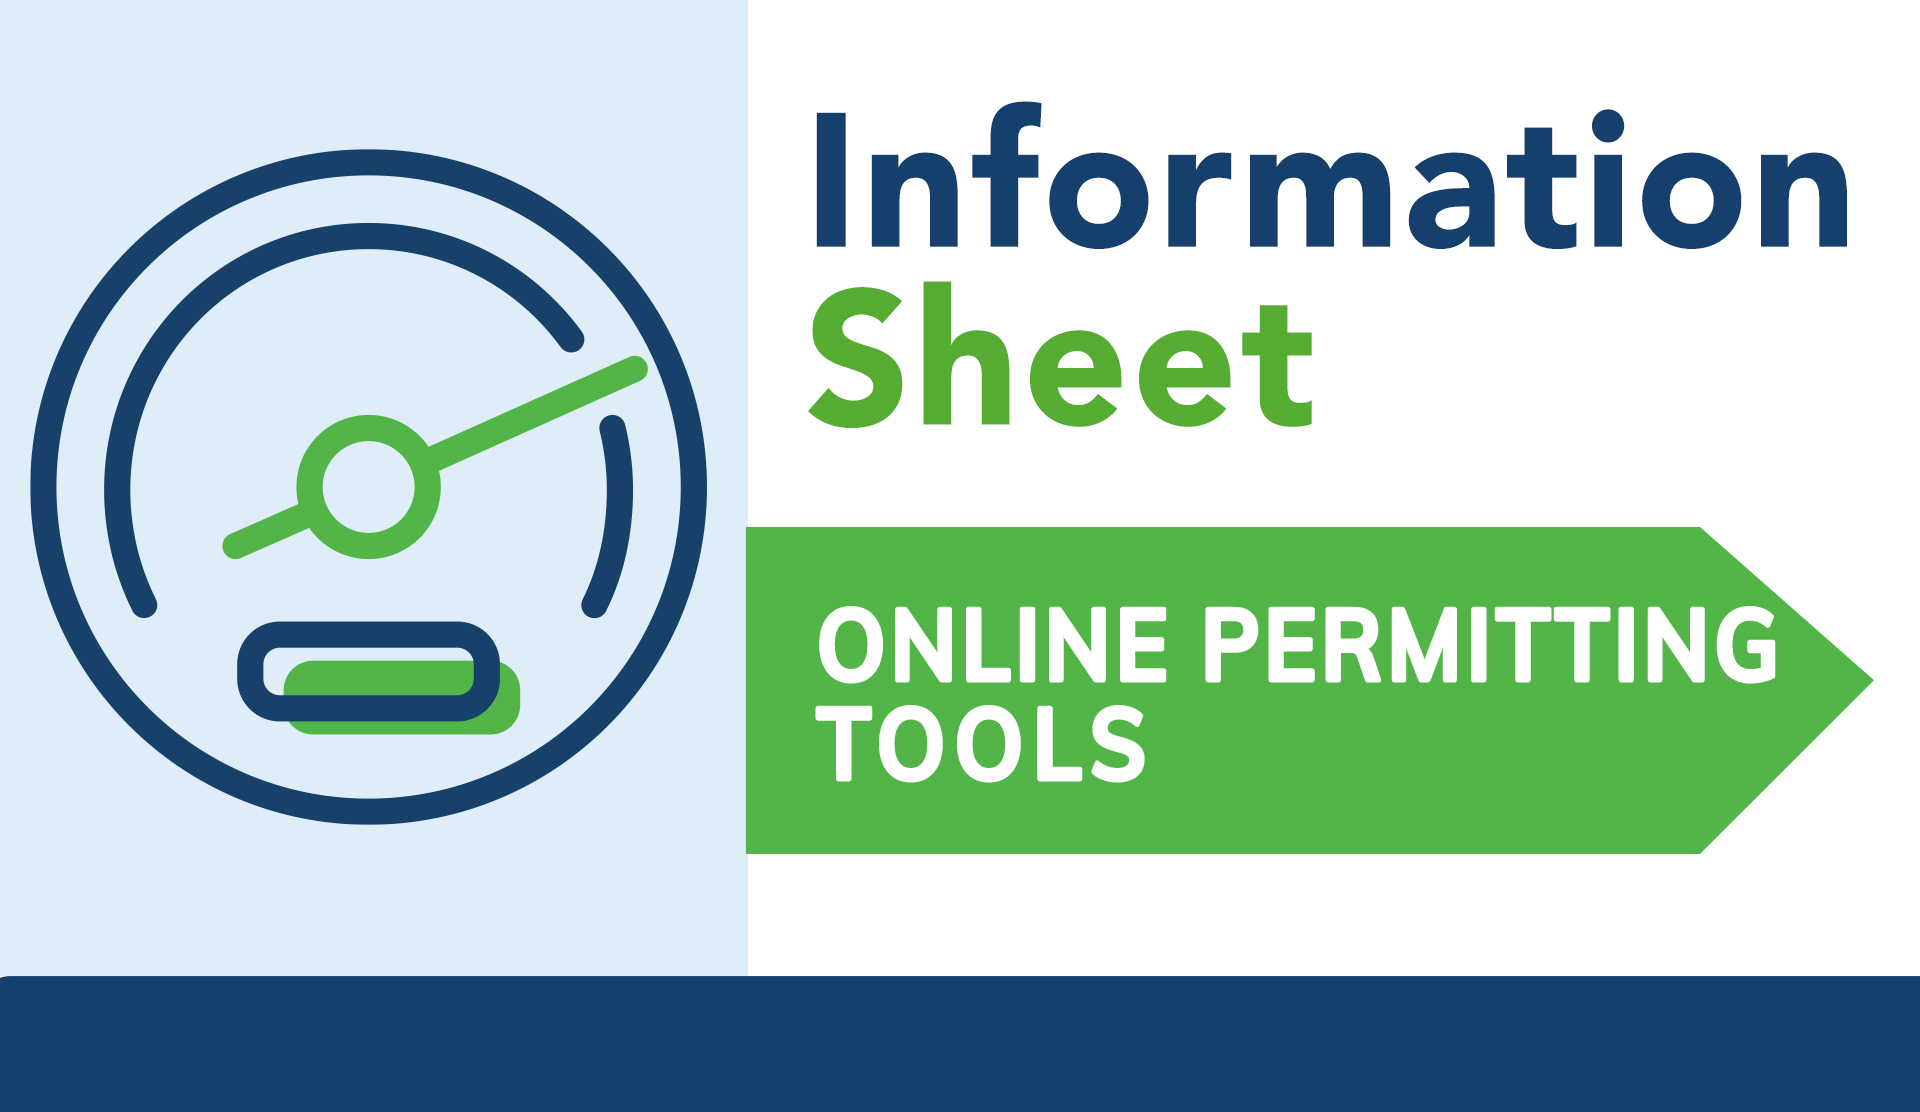 Online Permitting Tools Product Sheet